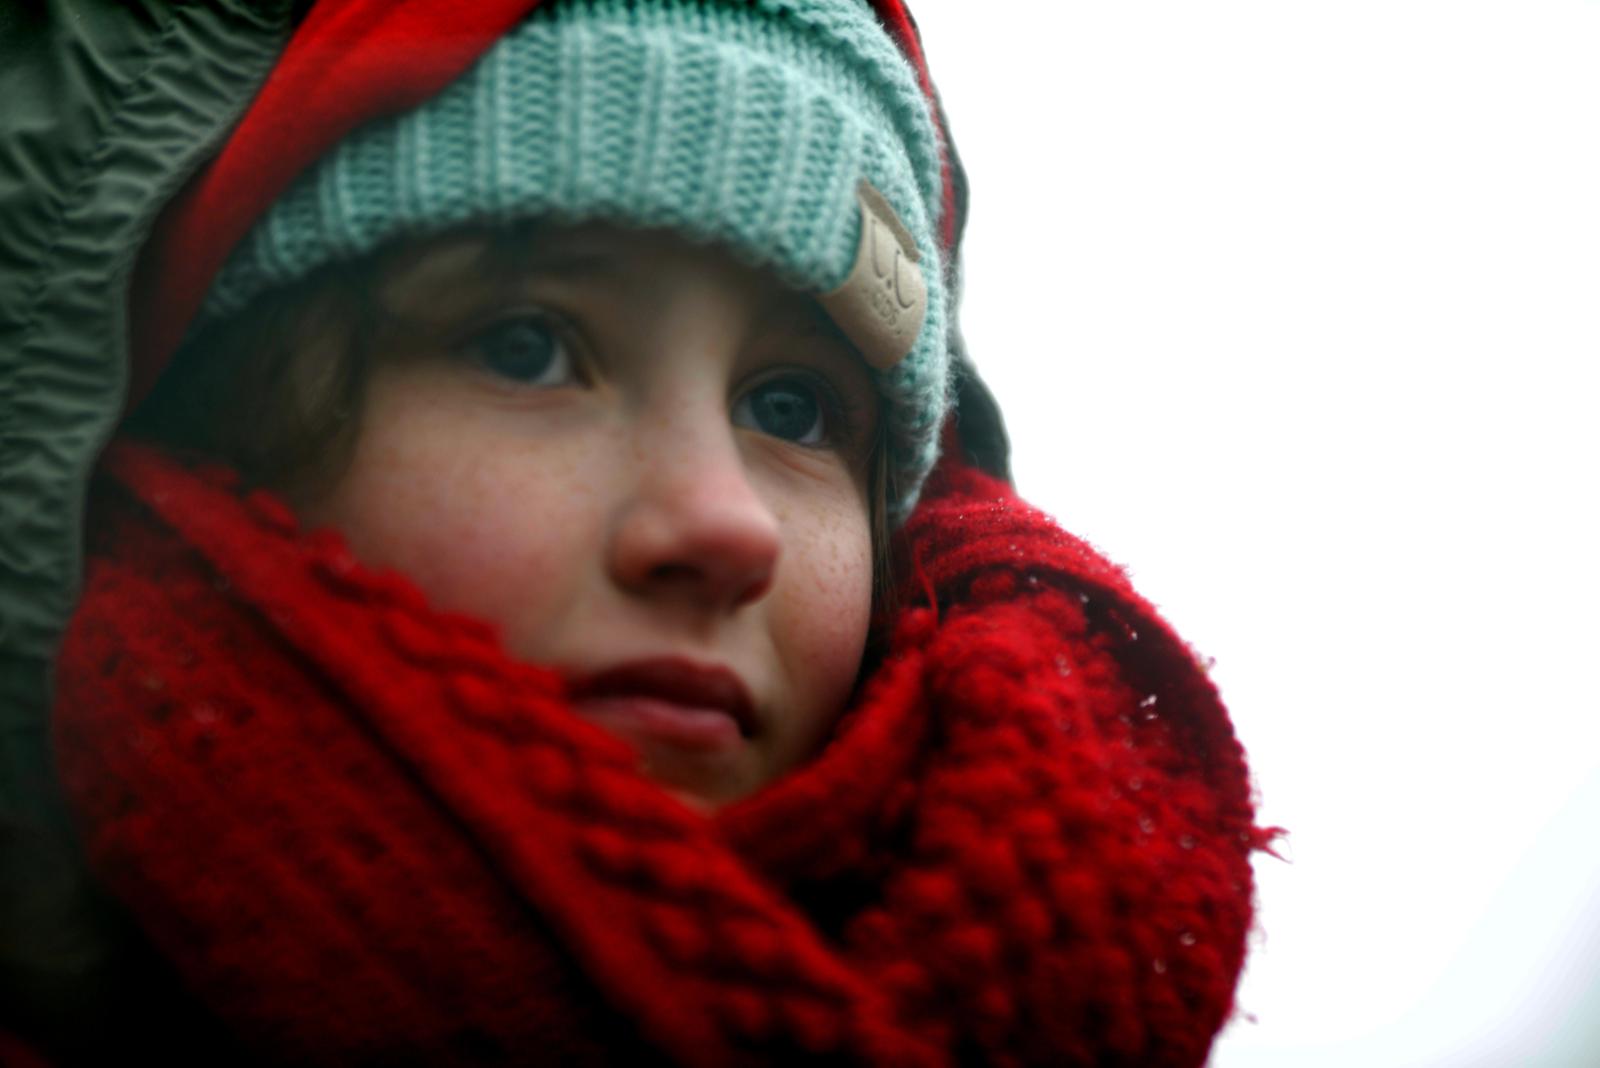 A young girl gazes over a sea of red at an empty street, waiting for the Kansas City Chiefs’ Super Bowl parade to start, on February 5, 2020, in Kansas City, Missouri. Her father placed her on top of his shoulders so she could clearly see the players as they paraded down Grand Blvd to Union Station.